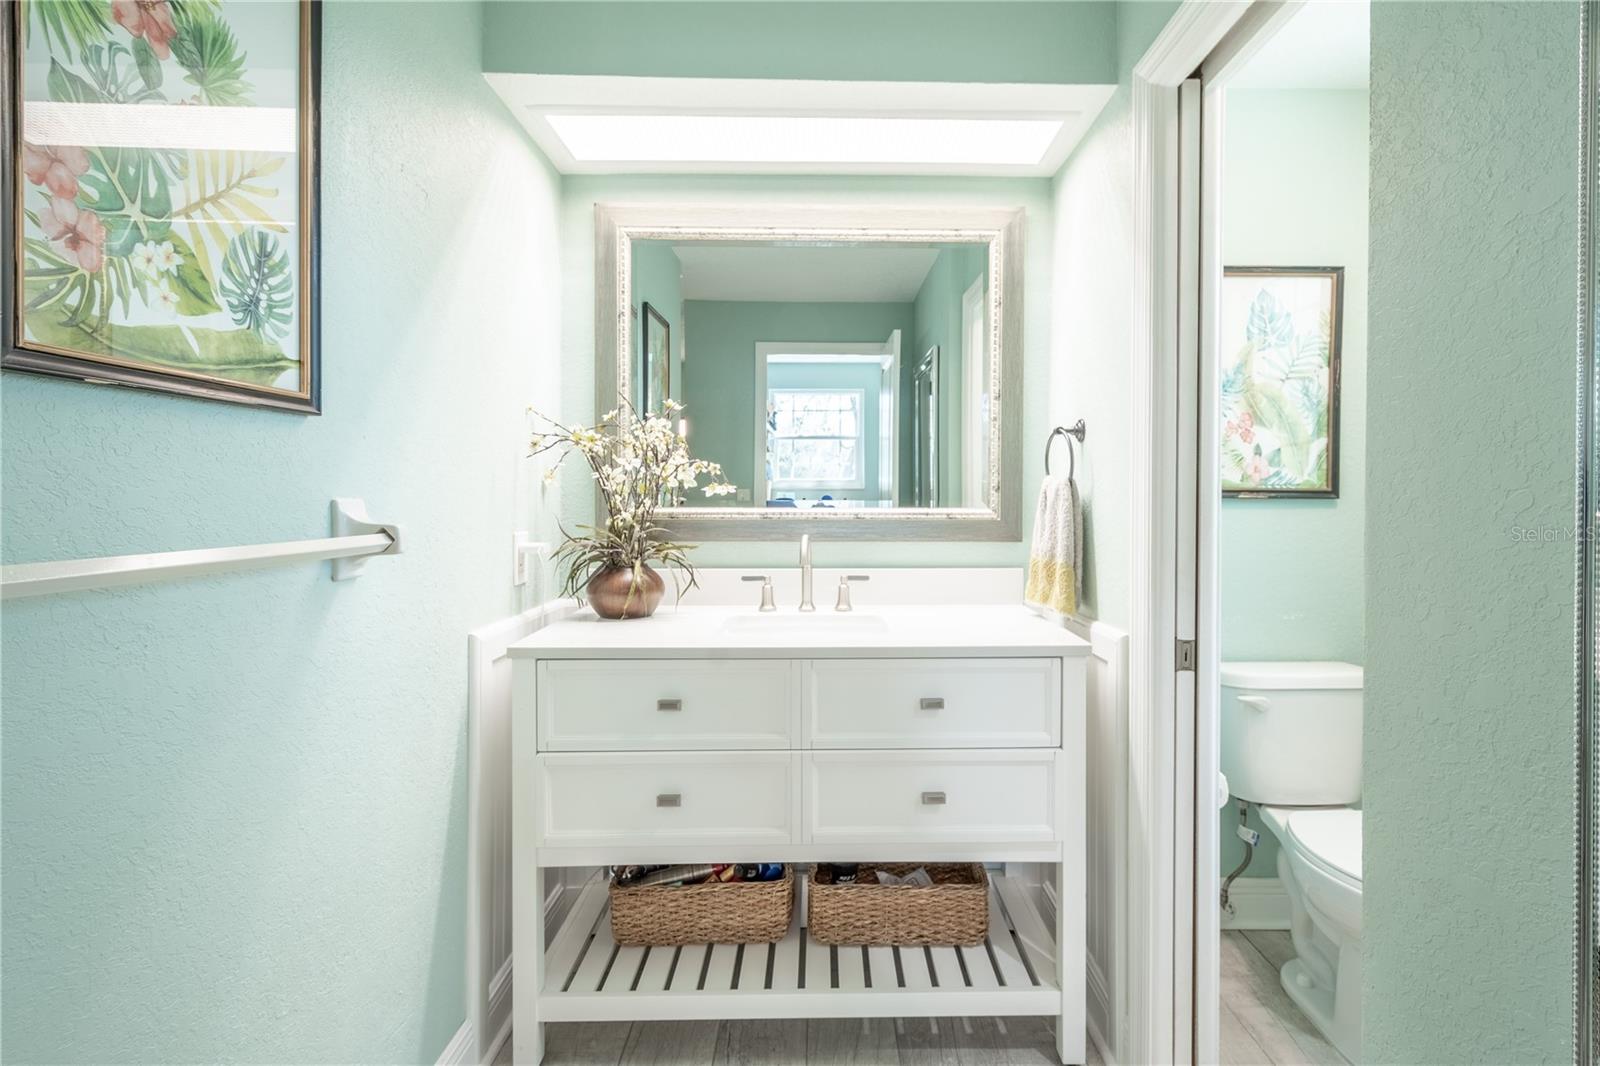 The upstairs primary ensuite bath fetures a mirrored vanity with storage and a w/c.